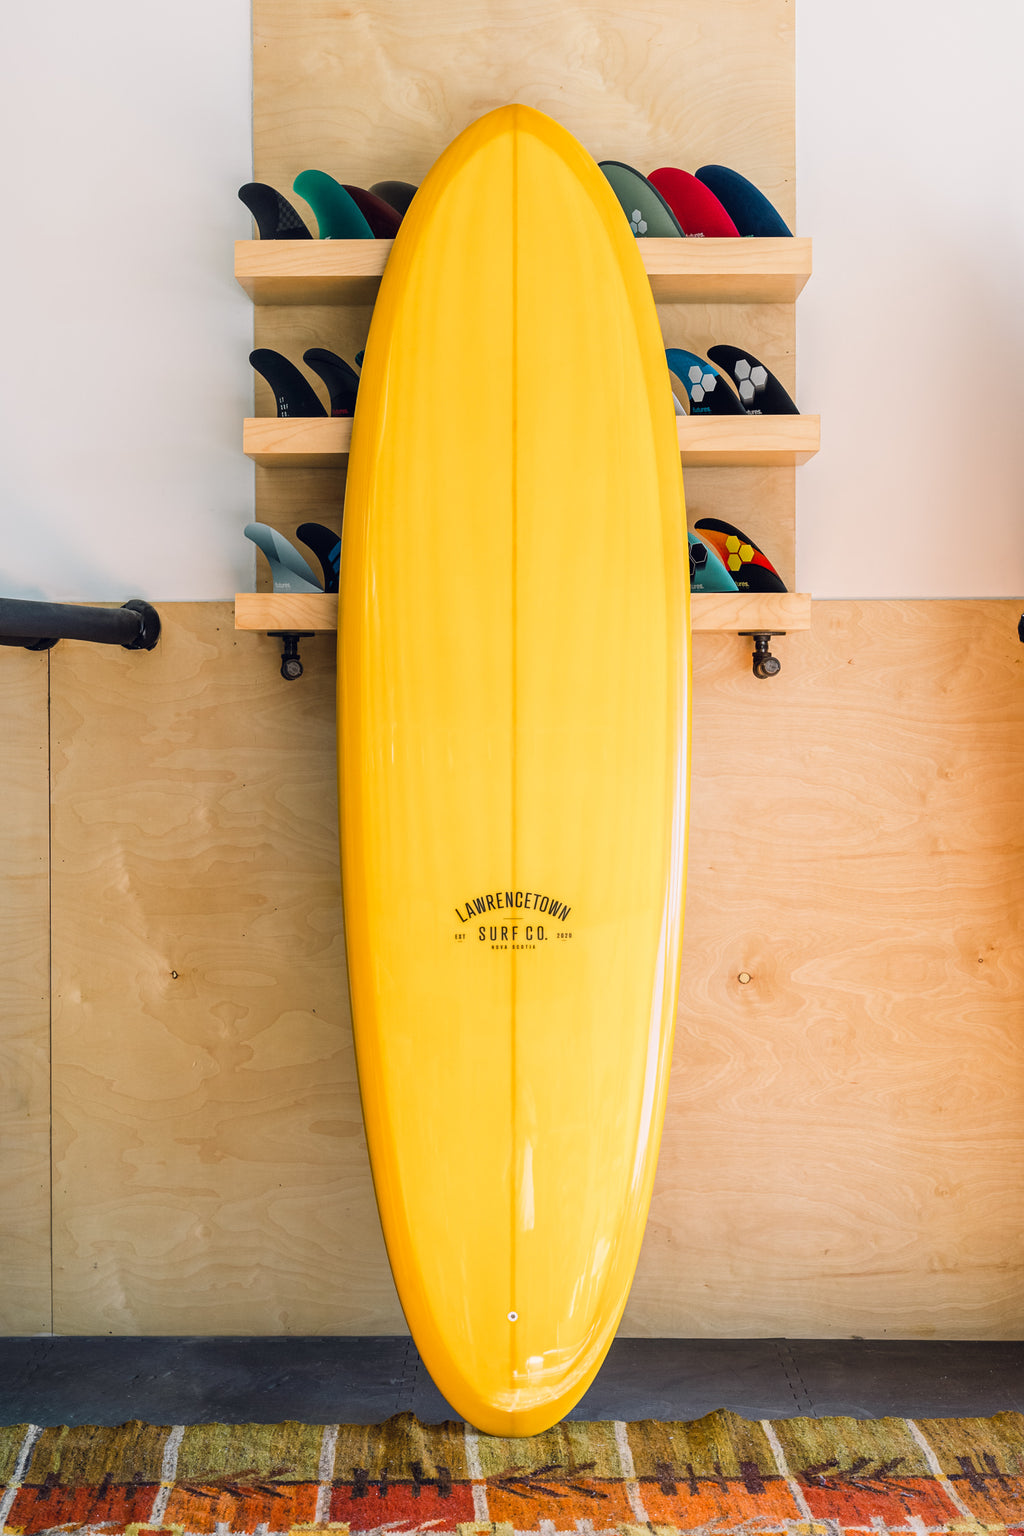 Lawrencetown Surf. Co - 6'6 Classic Egg